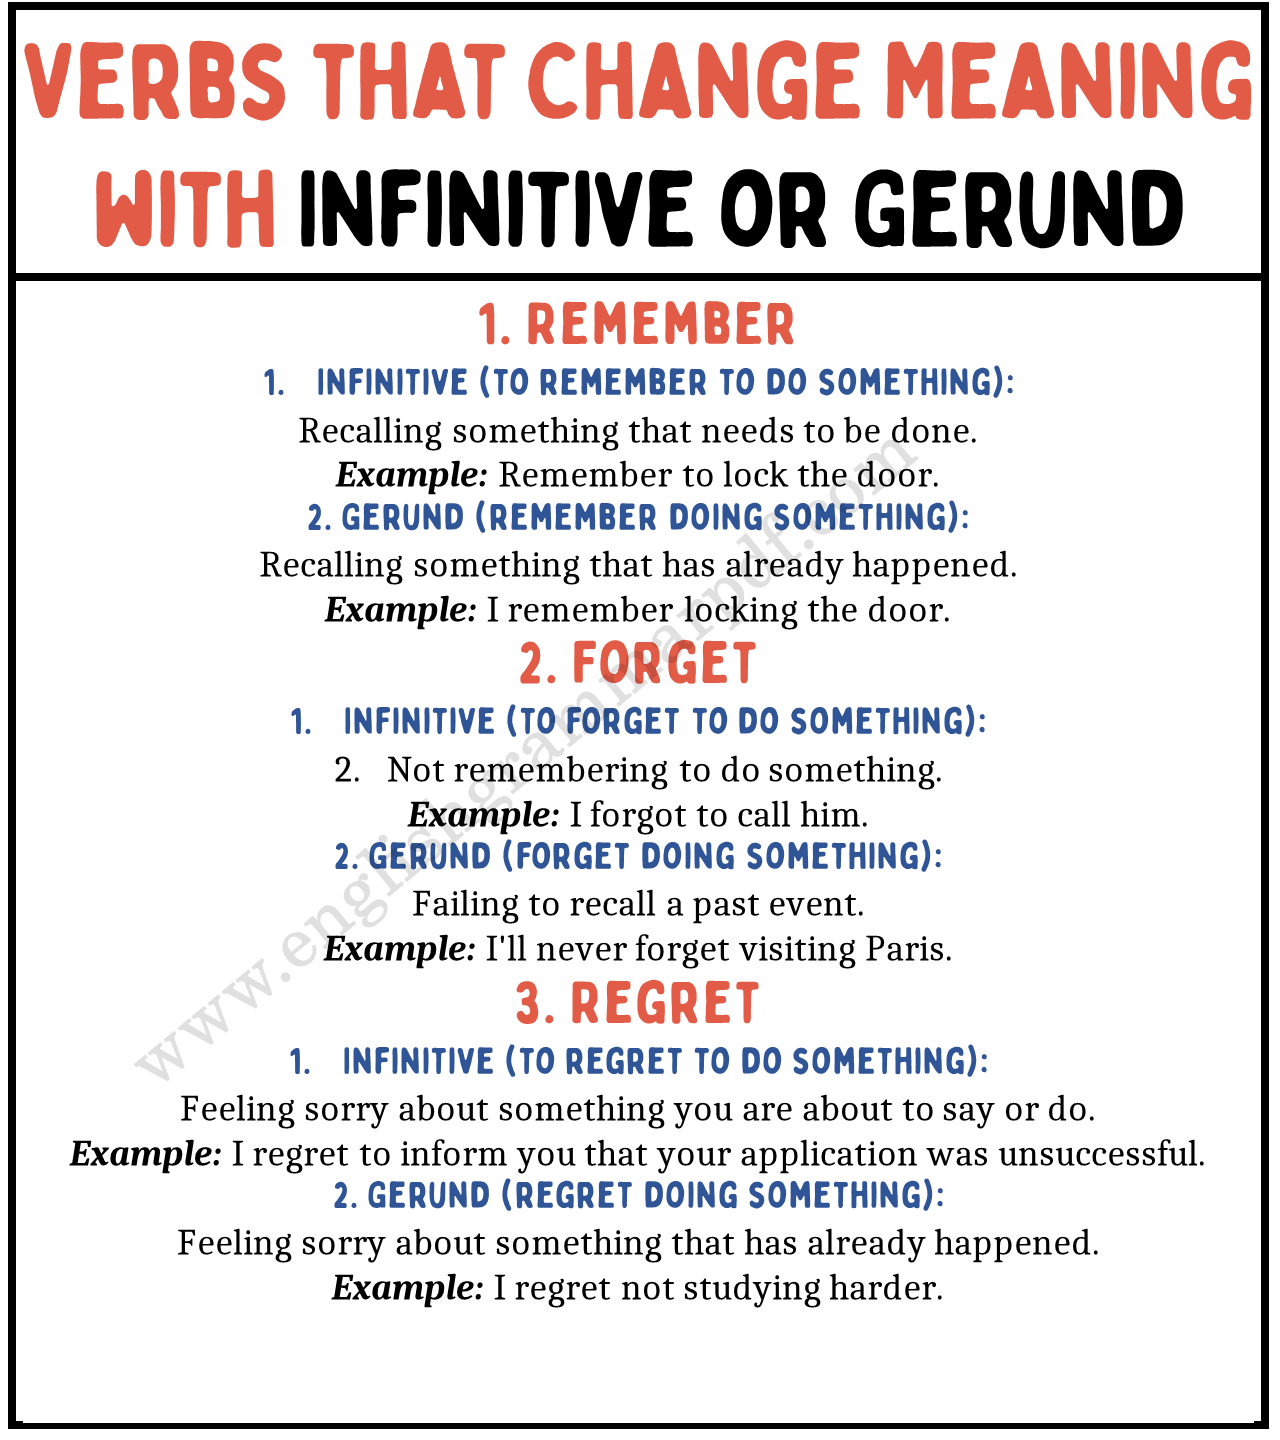 Verbs that Change Meaning with Infinitive or Gerund